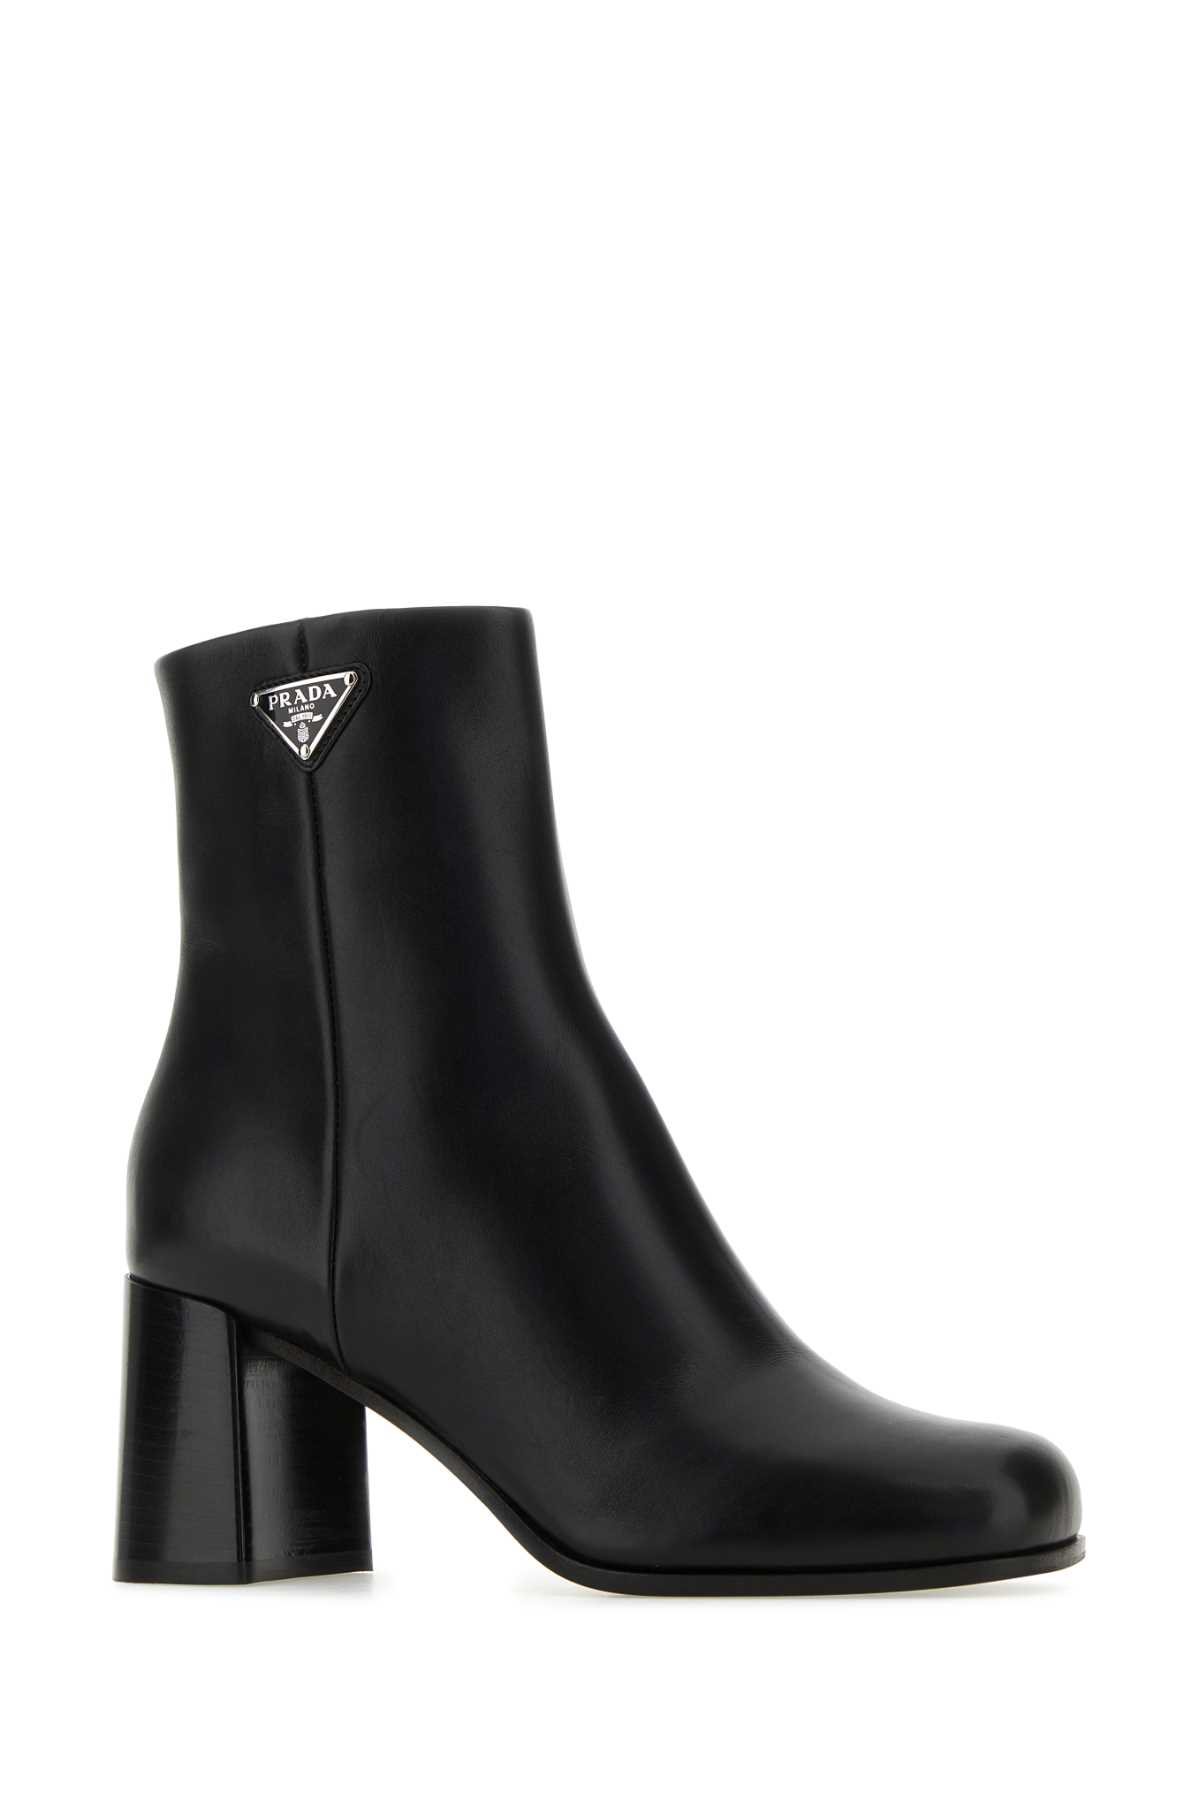 Shop Prada Black Leather Ankle Boots In Nero